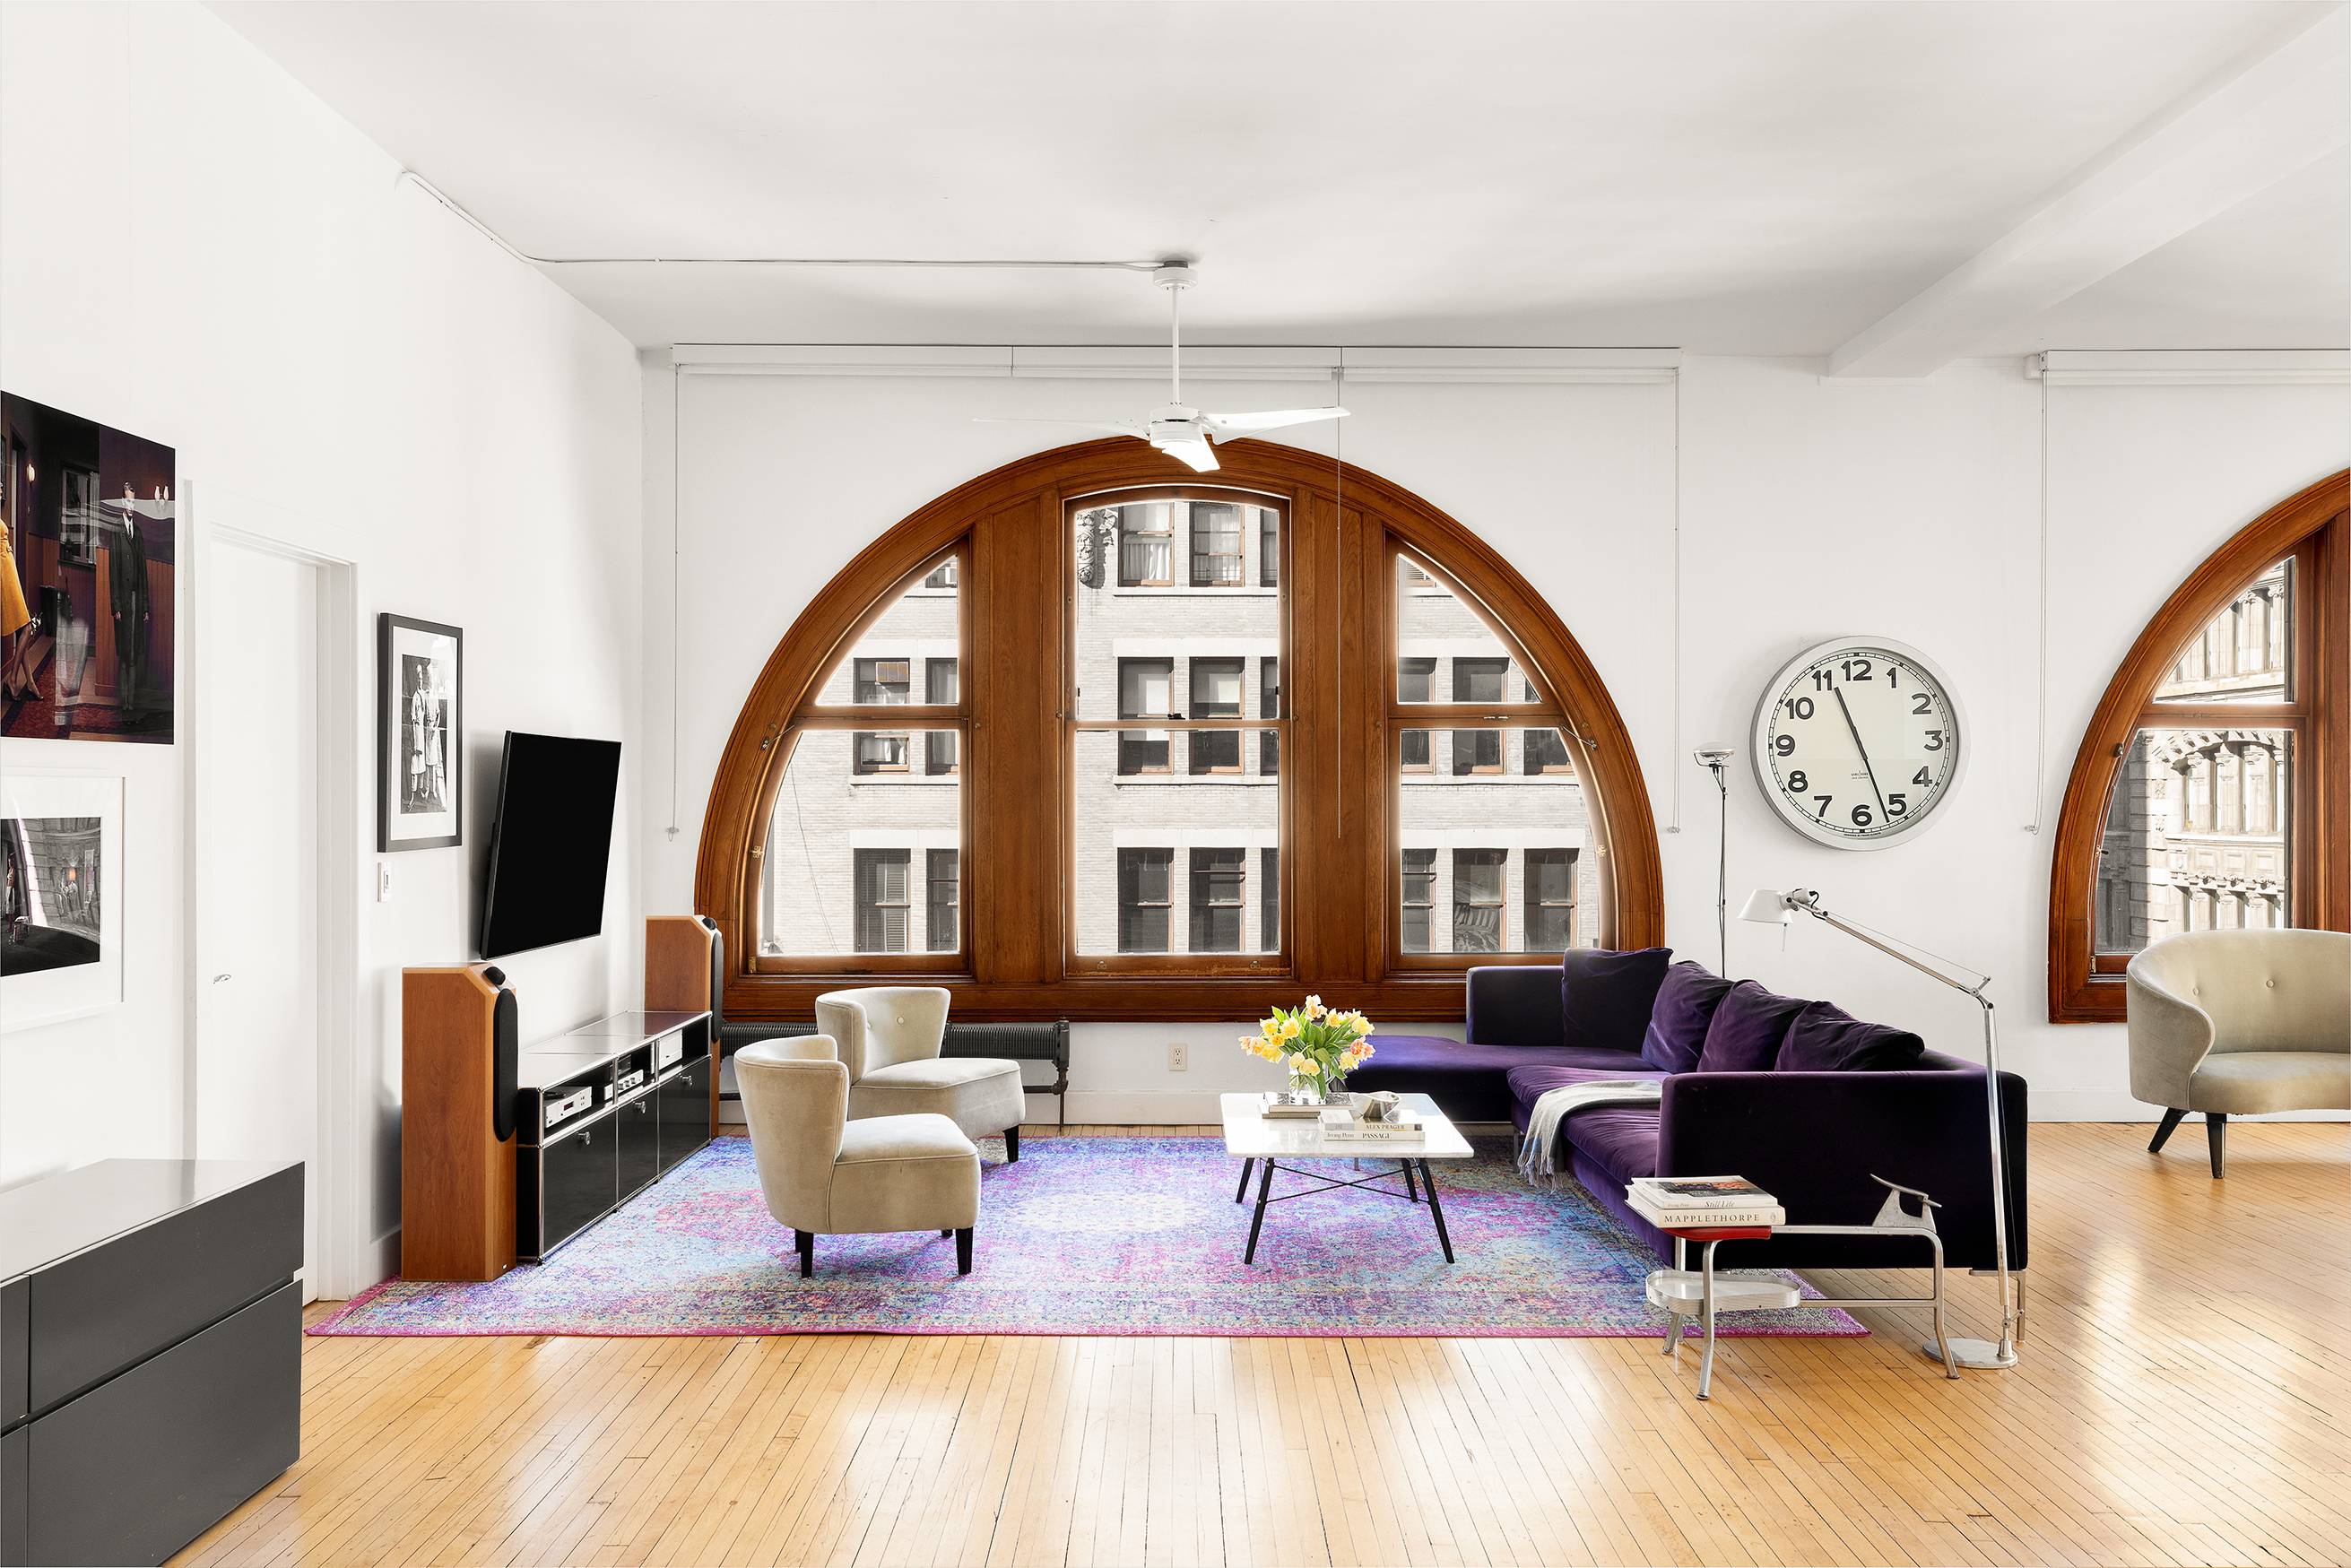 Perched high above the Ladies Mile District on Fifth Avenue in the heart of the Flatiron District, moments from Union Square, this classic New York loft is a corner home ...